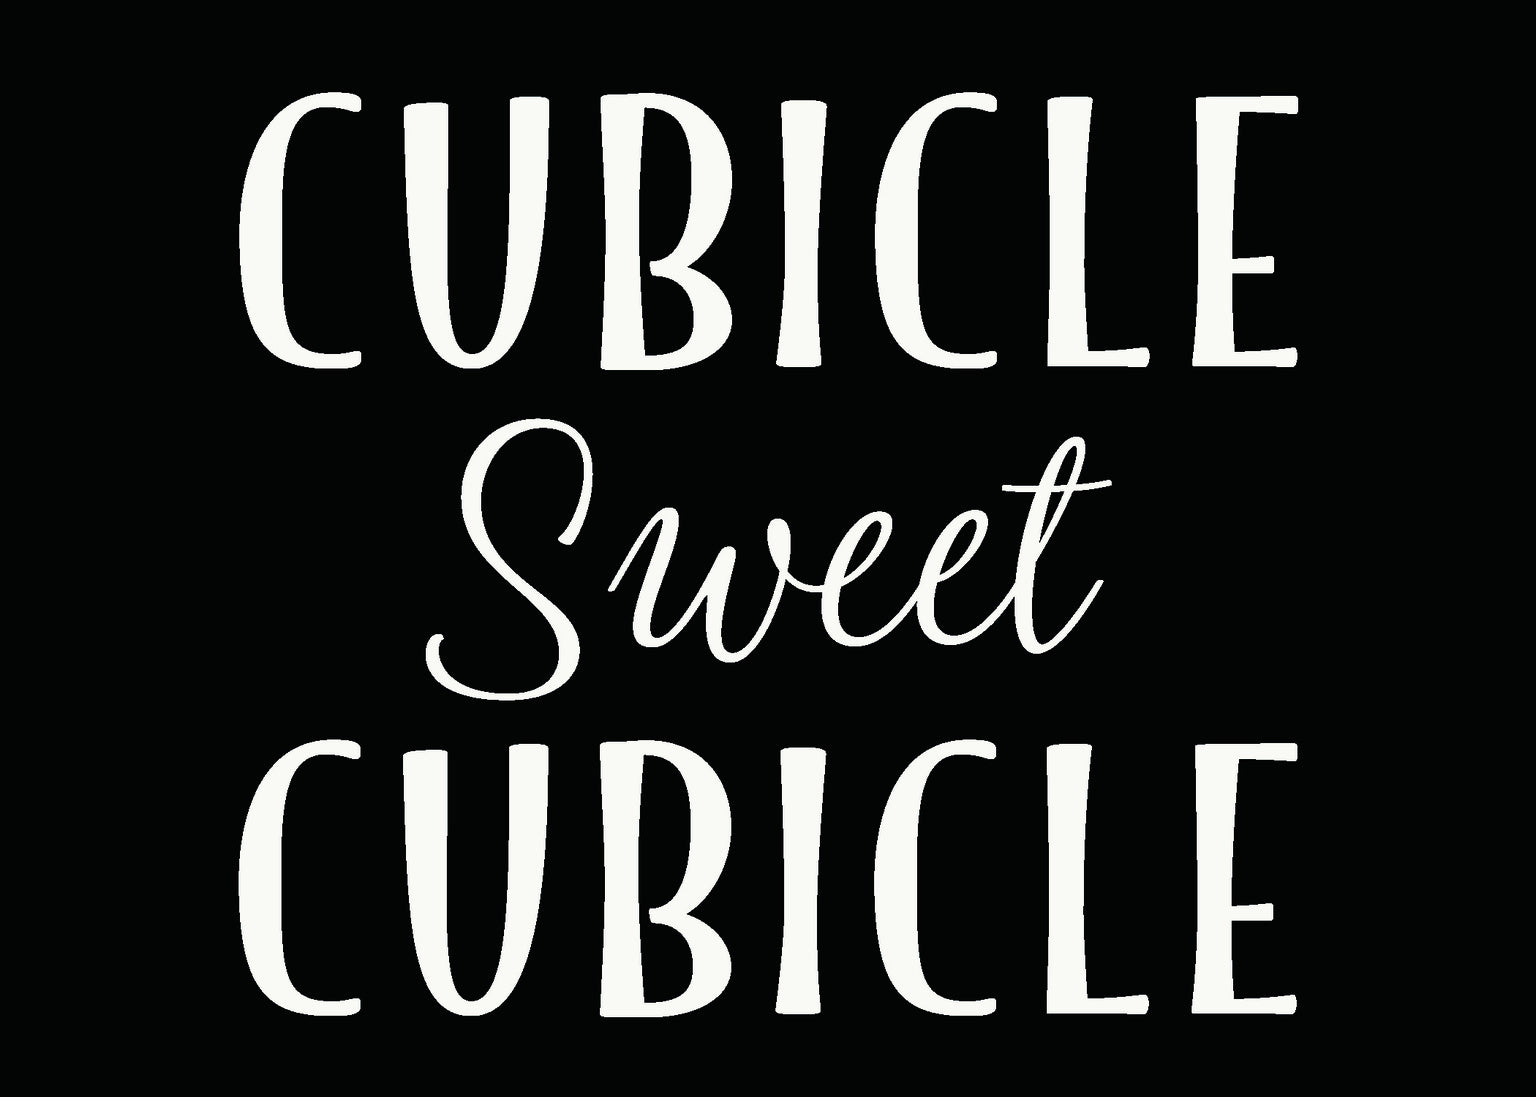 cubicle-sweet-cubicle-5x7-box-sign-sixtrees